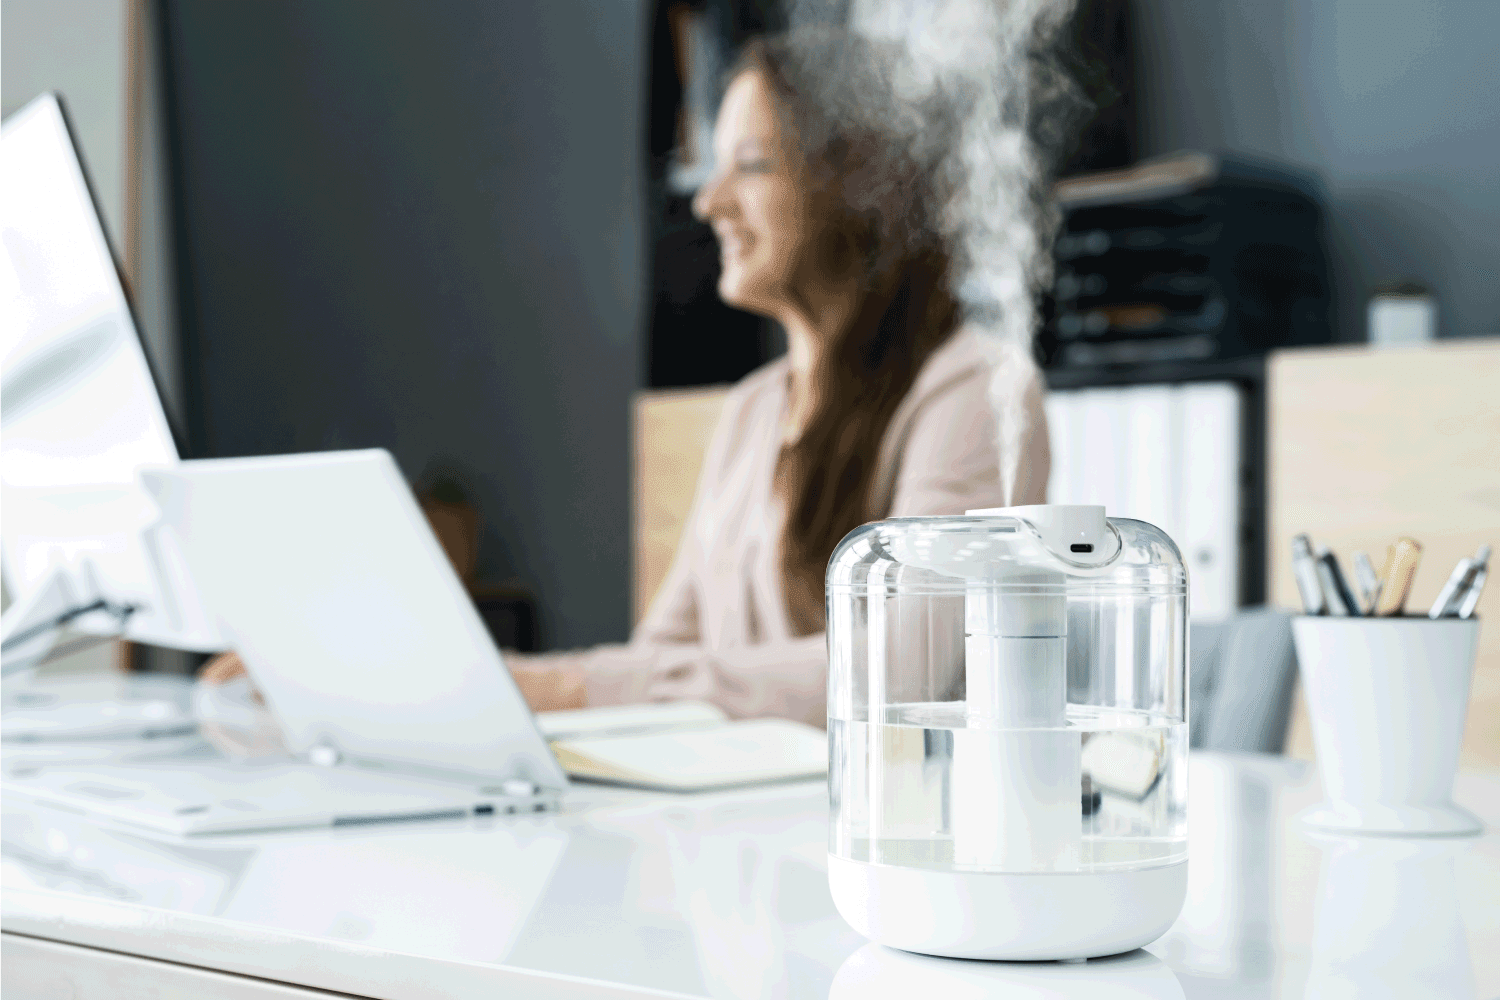 Air Humidifier Device At Office Desk Near Woman Working